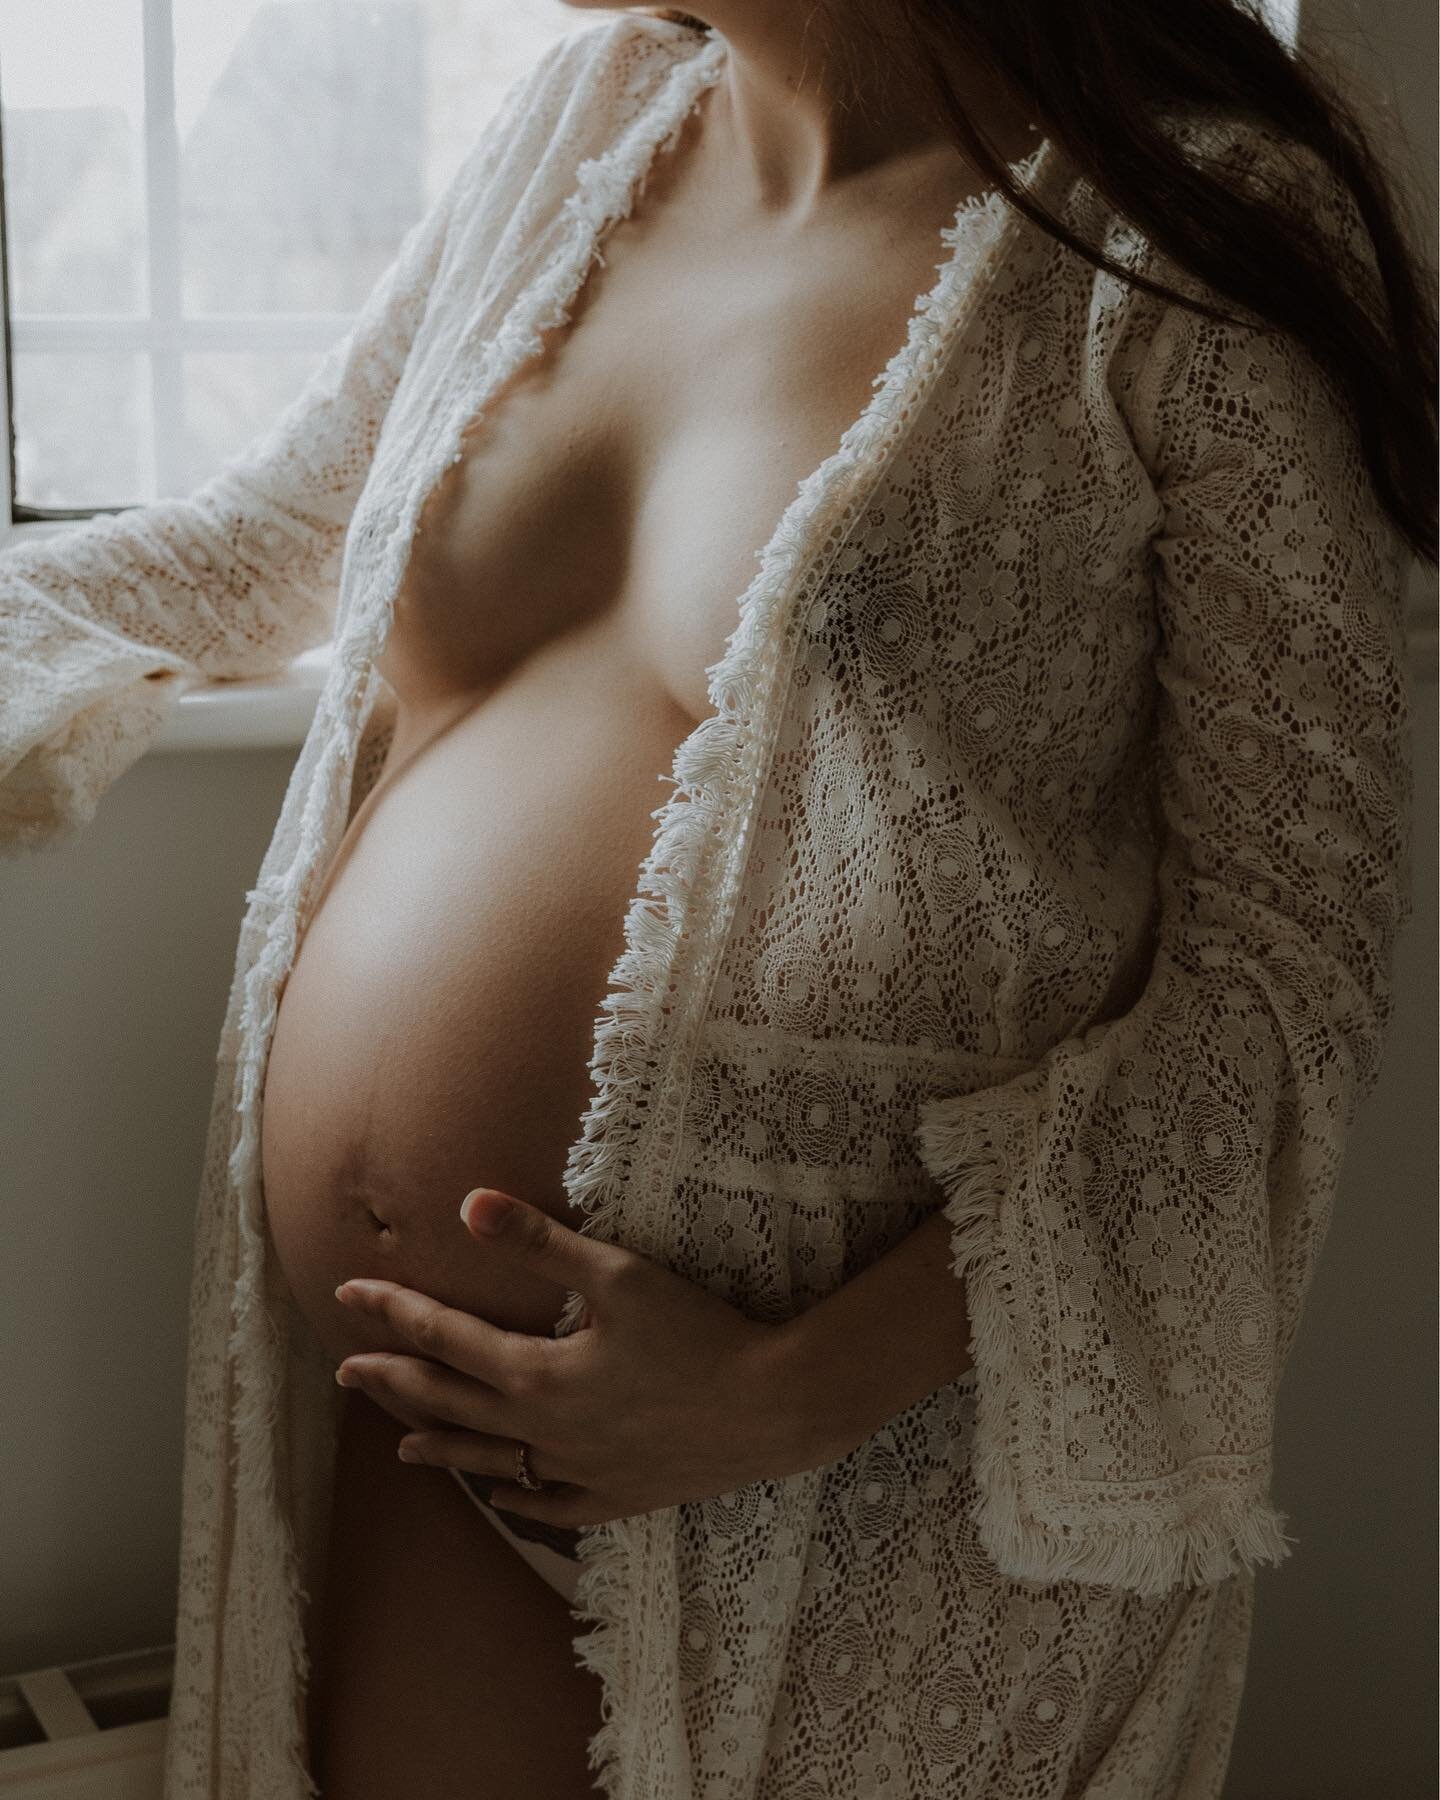 Still so infatuated with this session. In-home maternity moments spent embracing your beautiful body and bump which you will undoubtedly miss when it&rsquo;s gone. All the flutters, rolls, kicks and hiccups. Stroking and holding your belly at every c